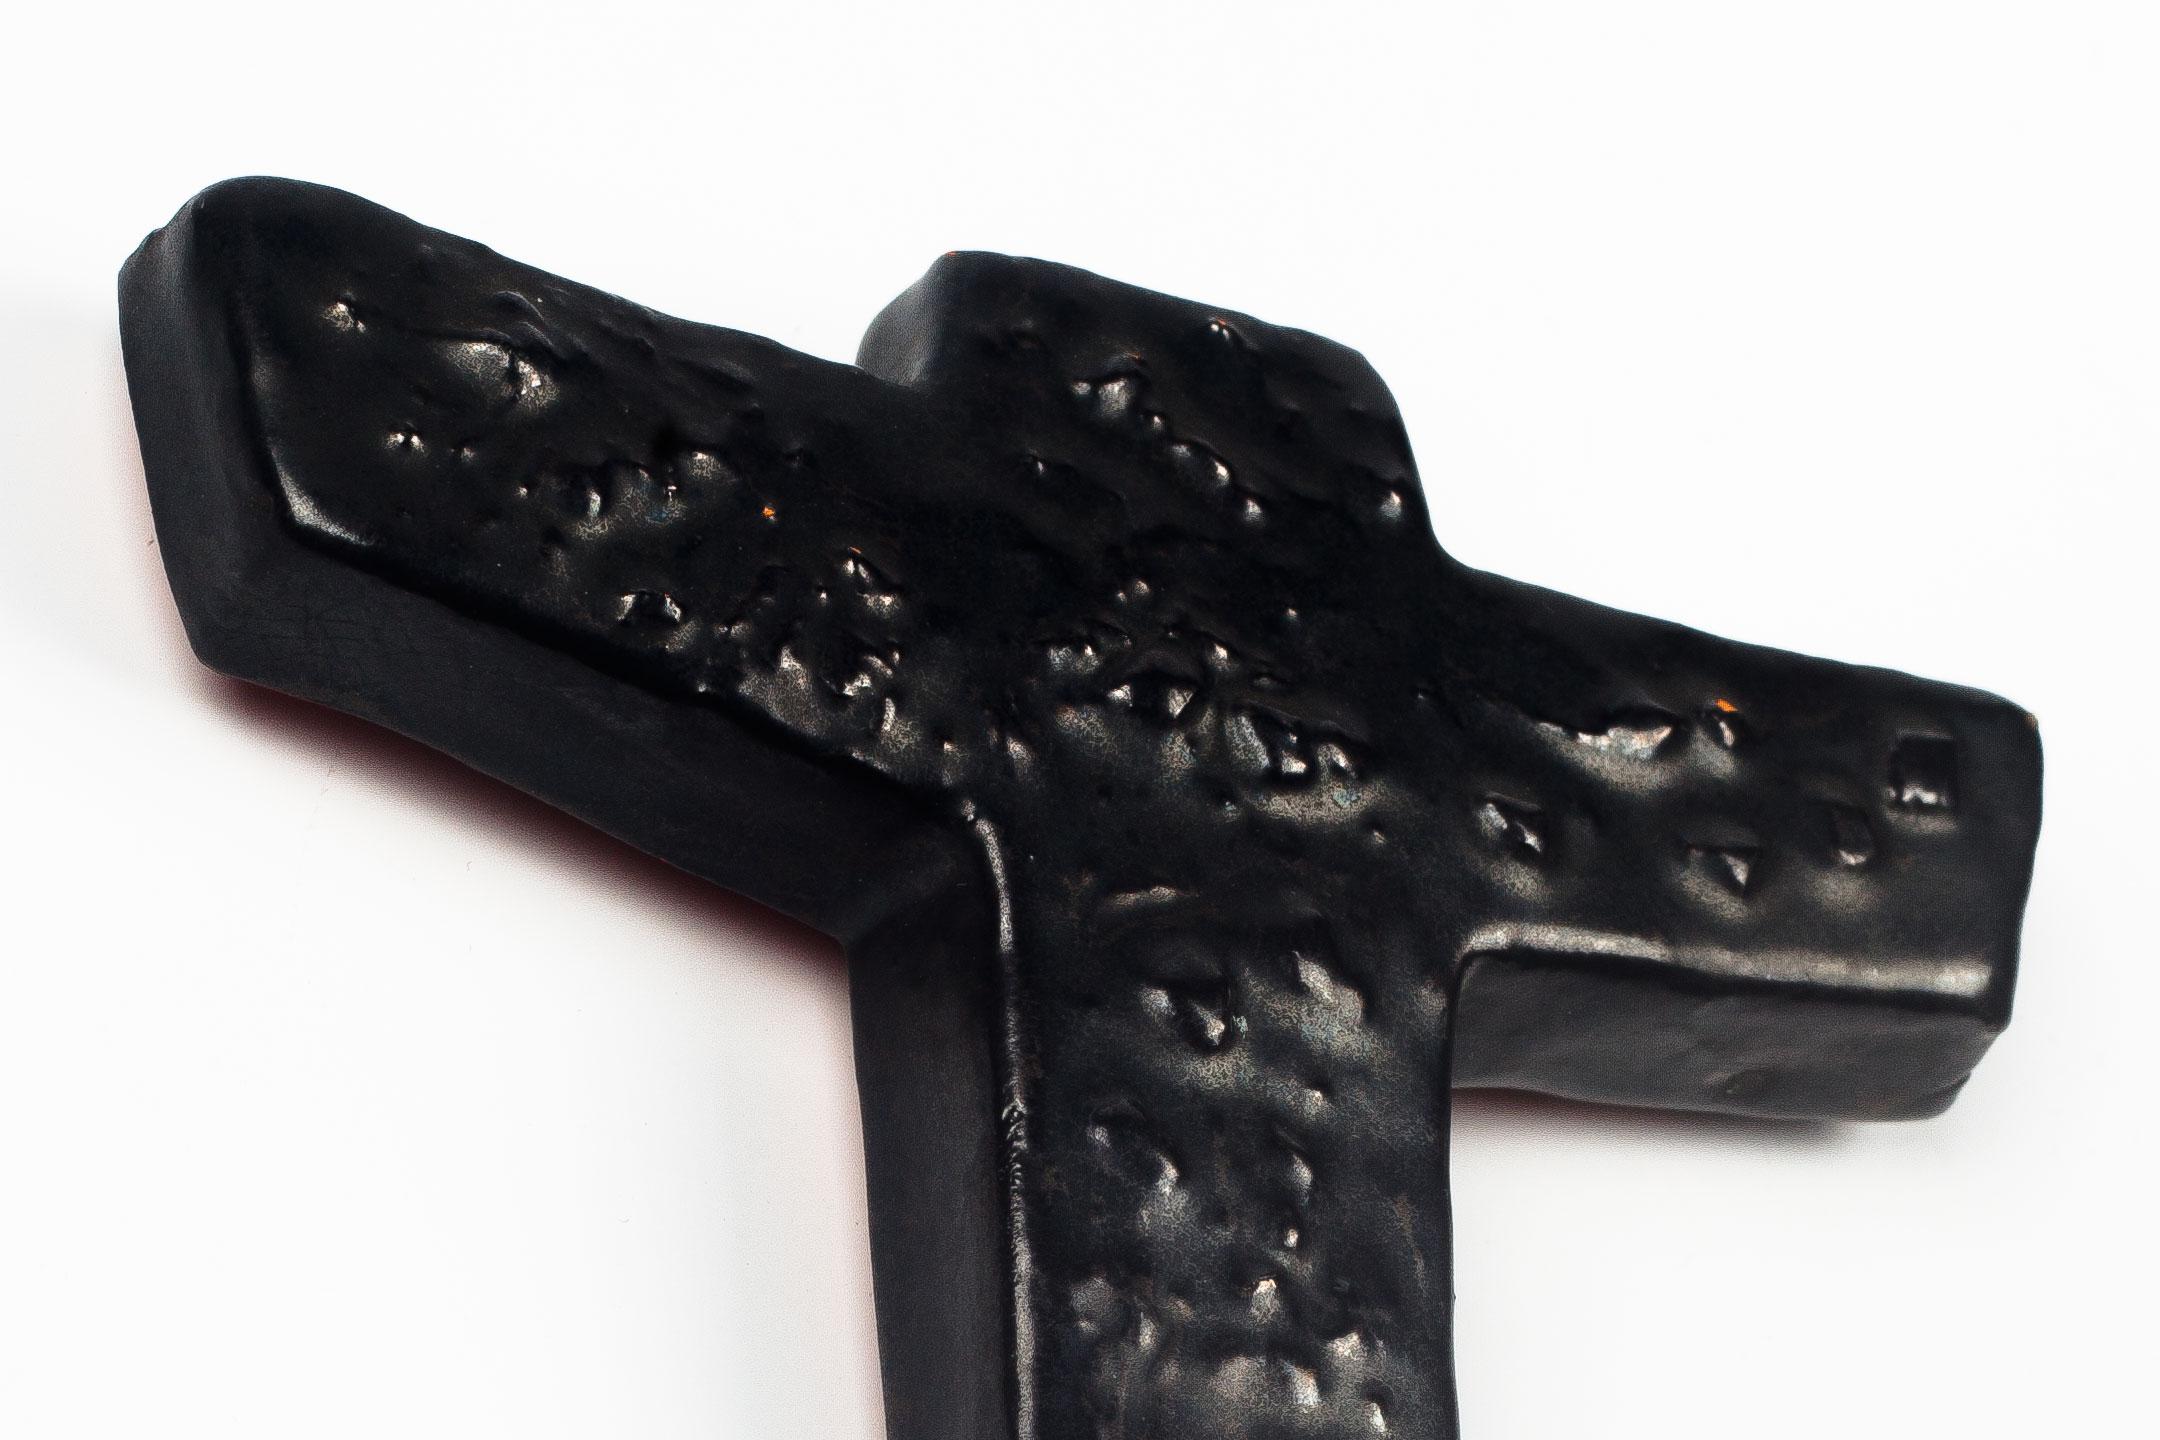 Crucifix in slightly metallic glazed black ceramic with texture. Handmade made in Belgium in the 1970s. 

This piece is part of a large ceramic crucifix collection, all made in Belgium between the 1950 and late 1970s. From modernism to brutalism,